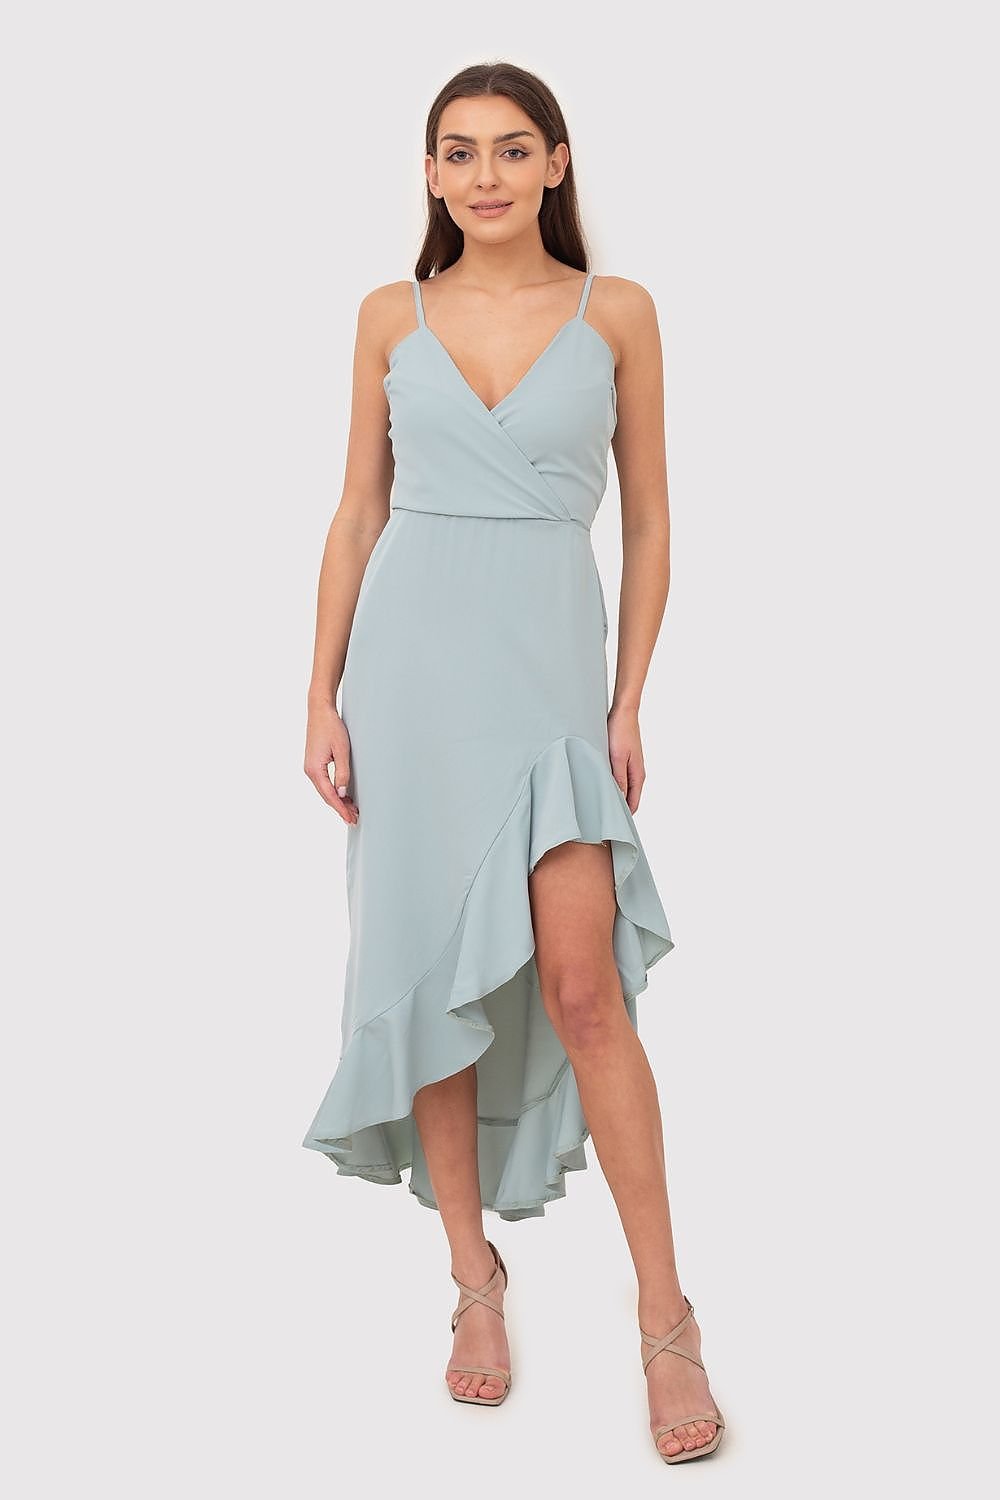 Summer midi cocktail dress in mint color